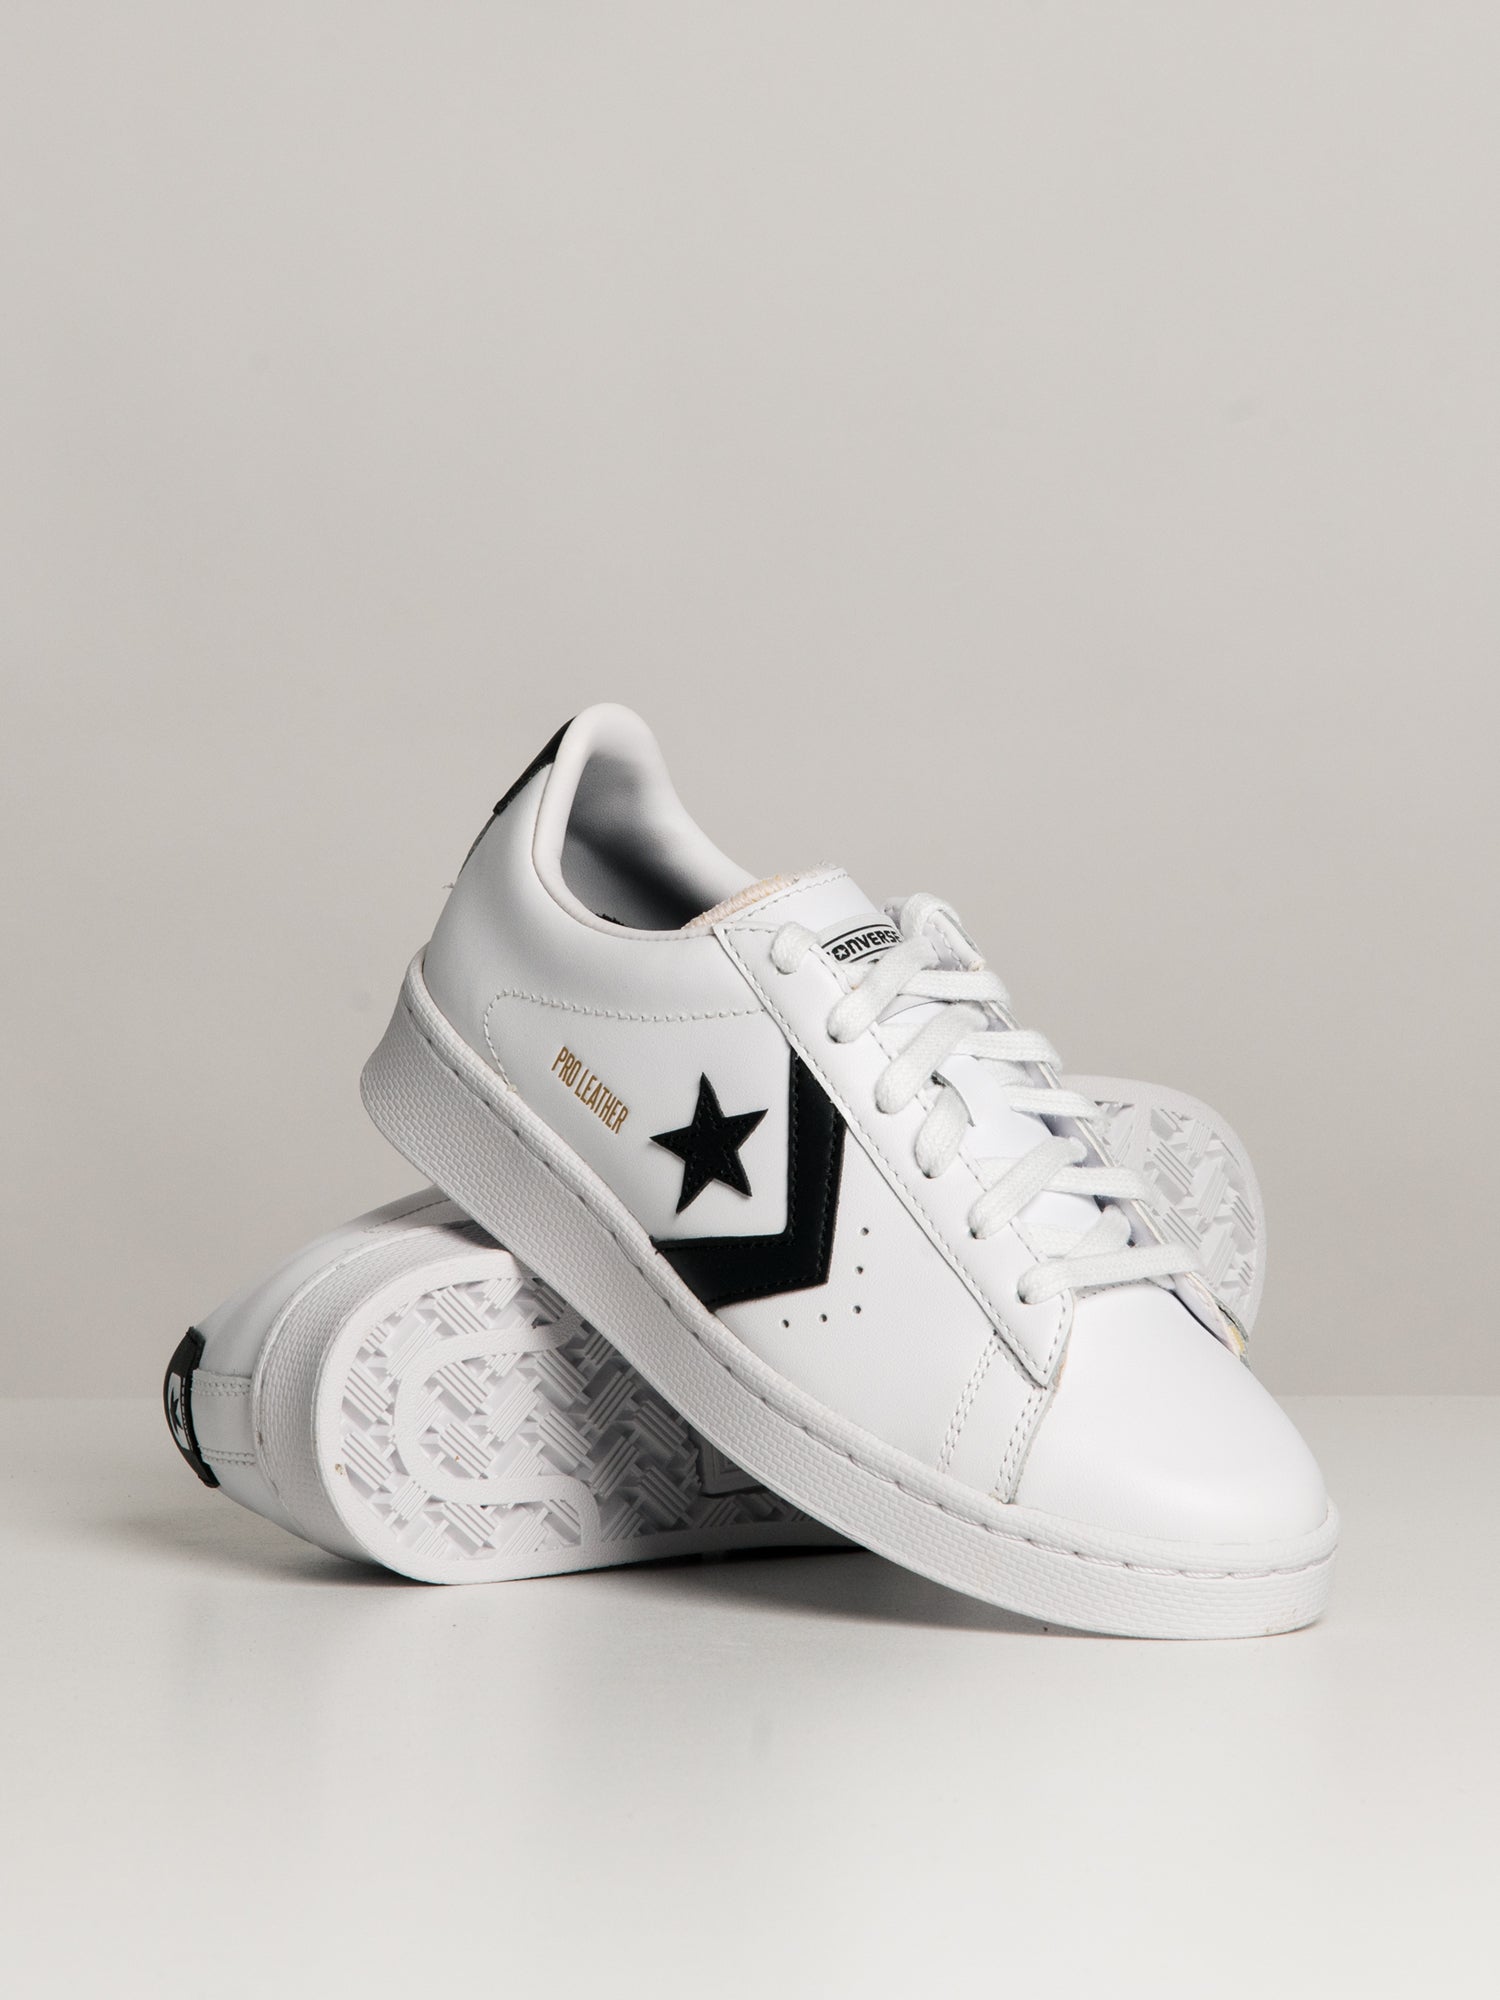 WOMENS CONVERSE PRO LEATHER OX SNEAKER - CLEARANCE